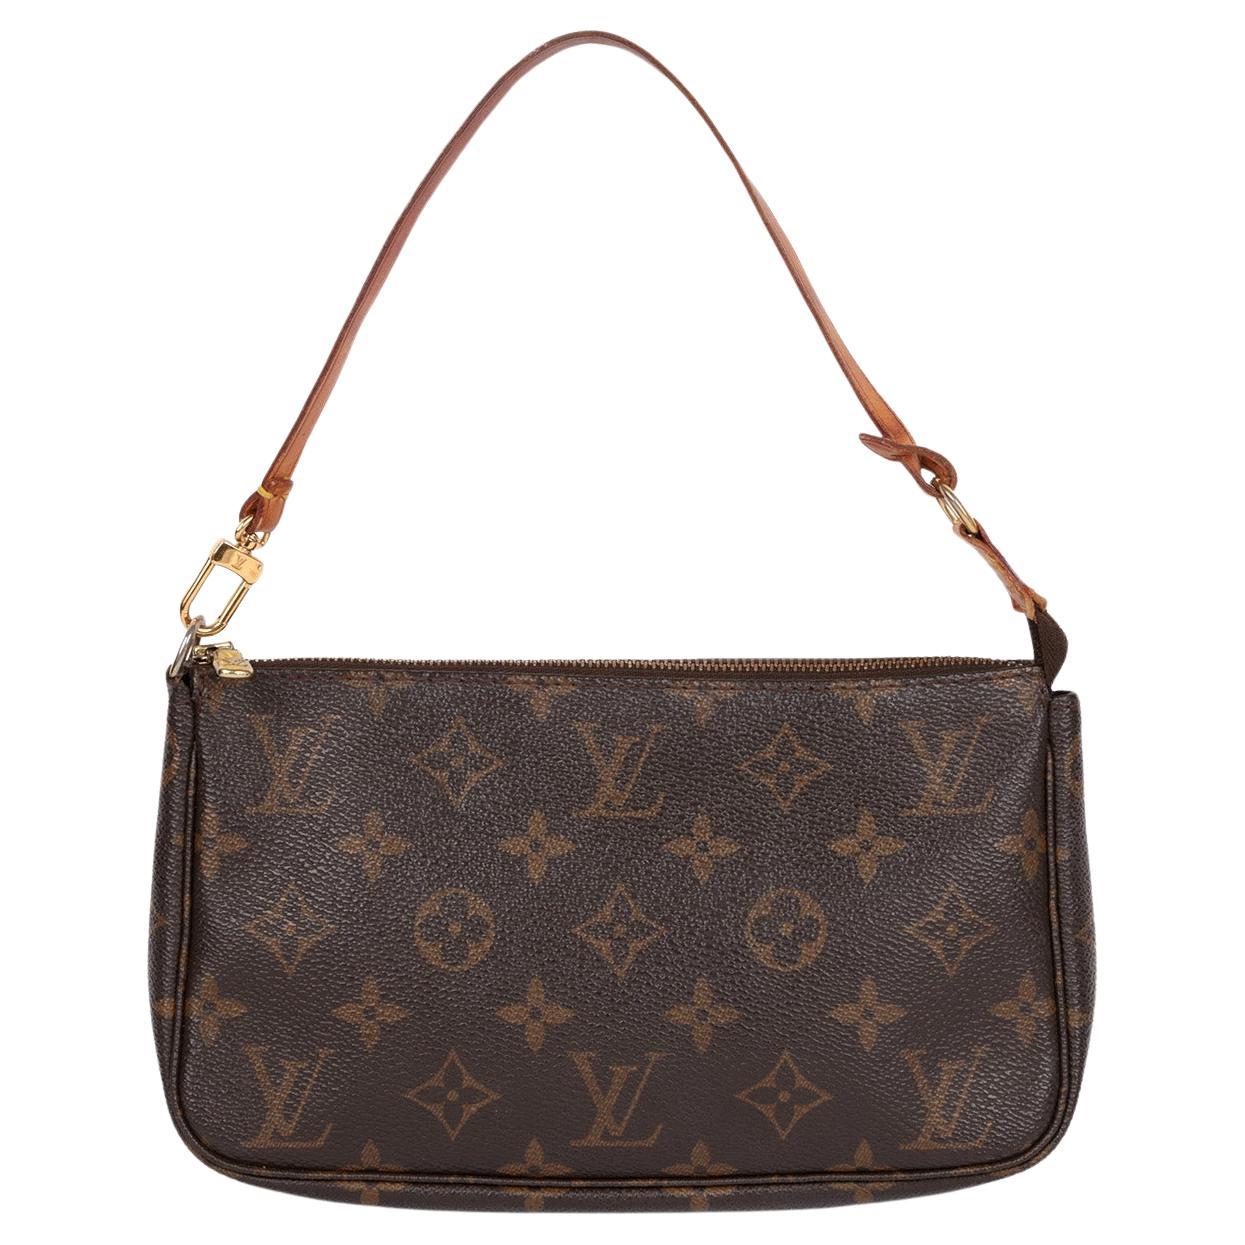 Who is the CEO of Louis Vuitton?